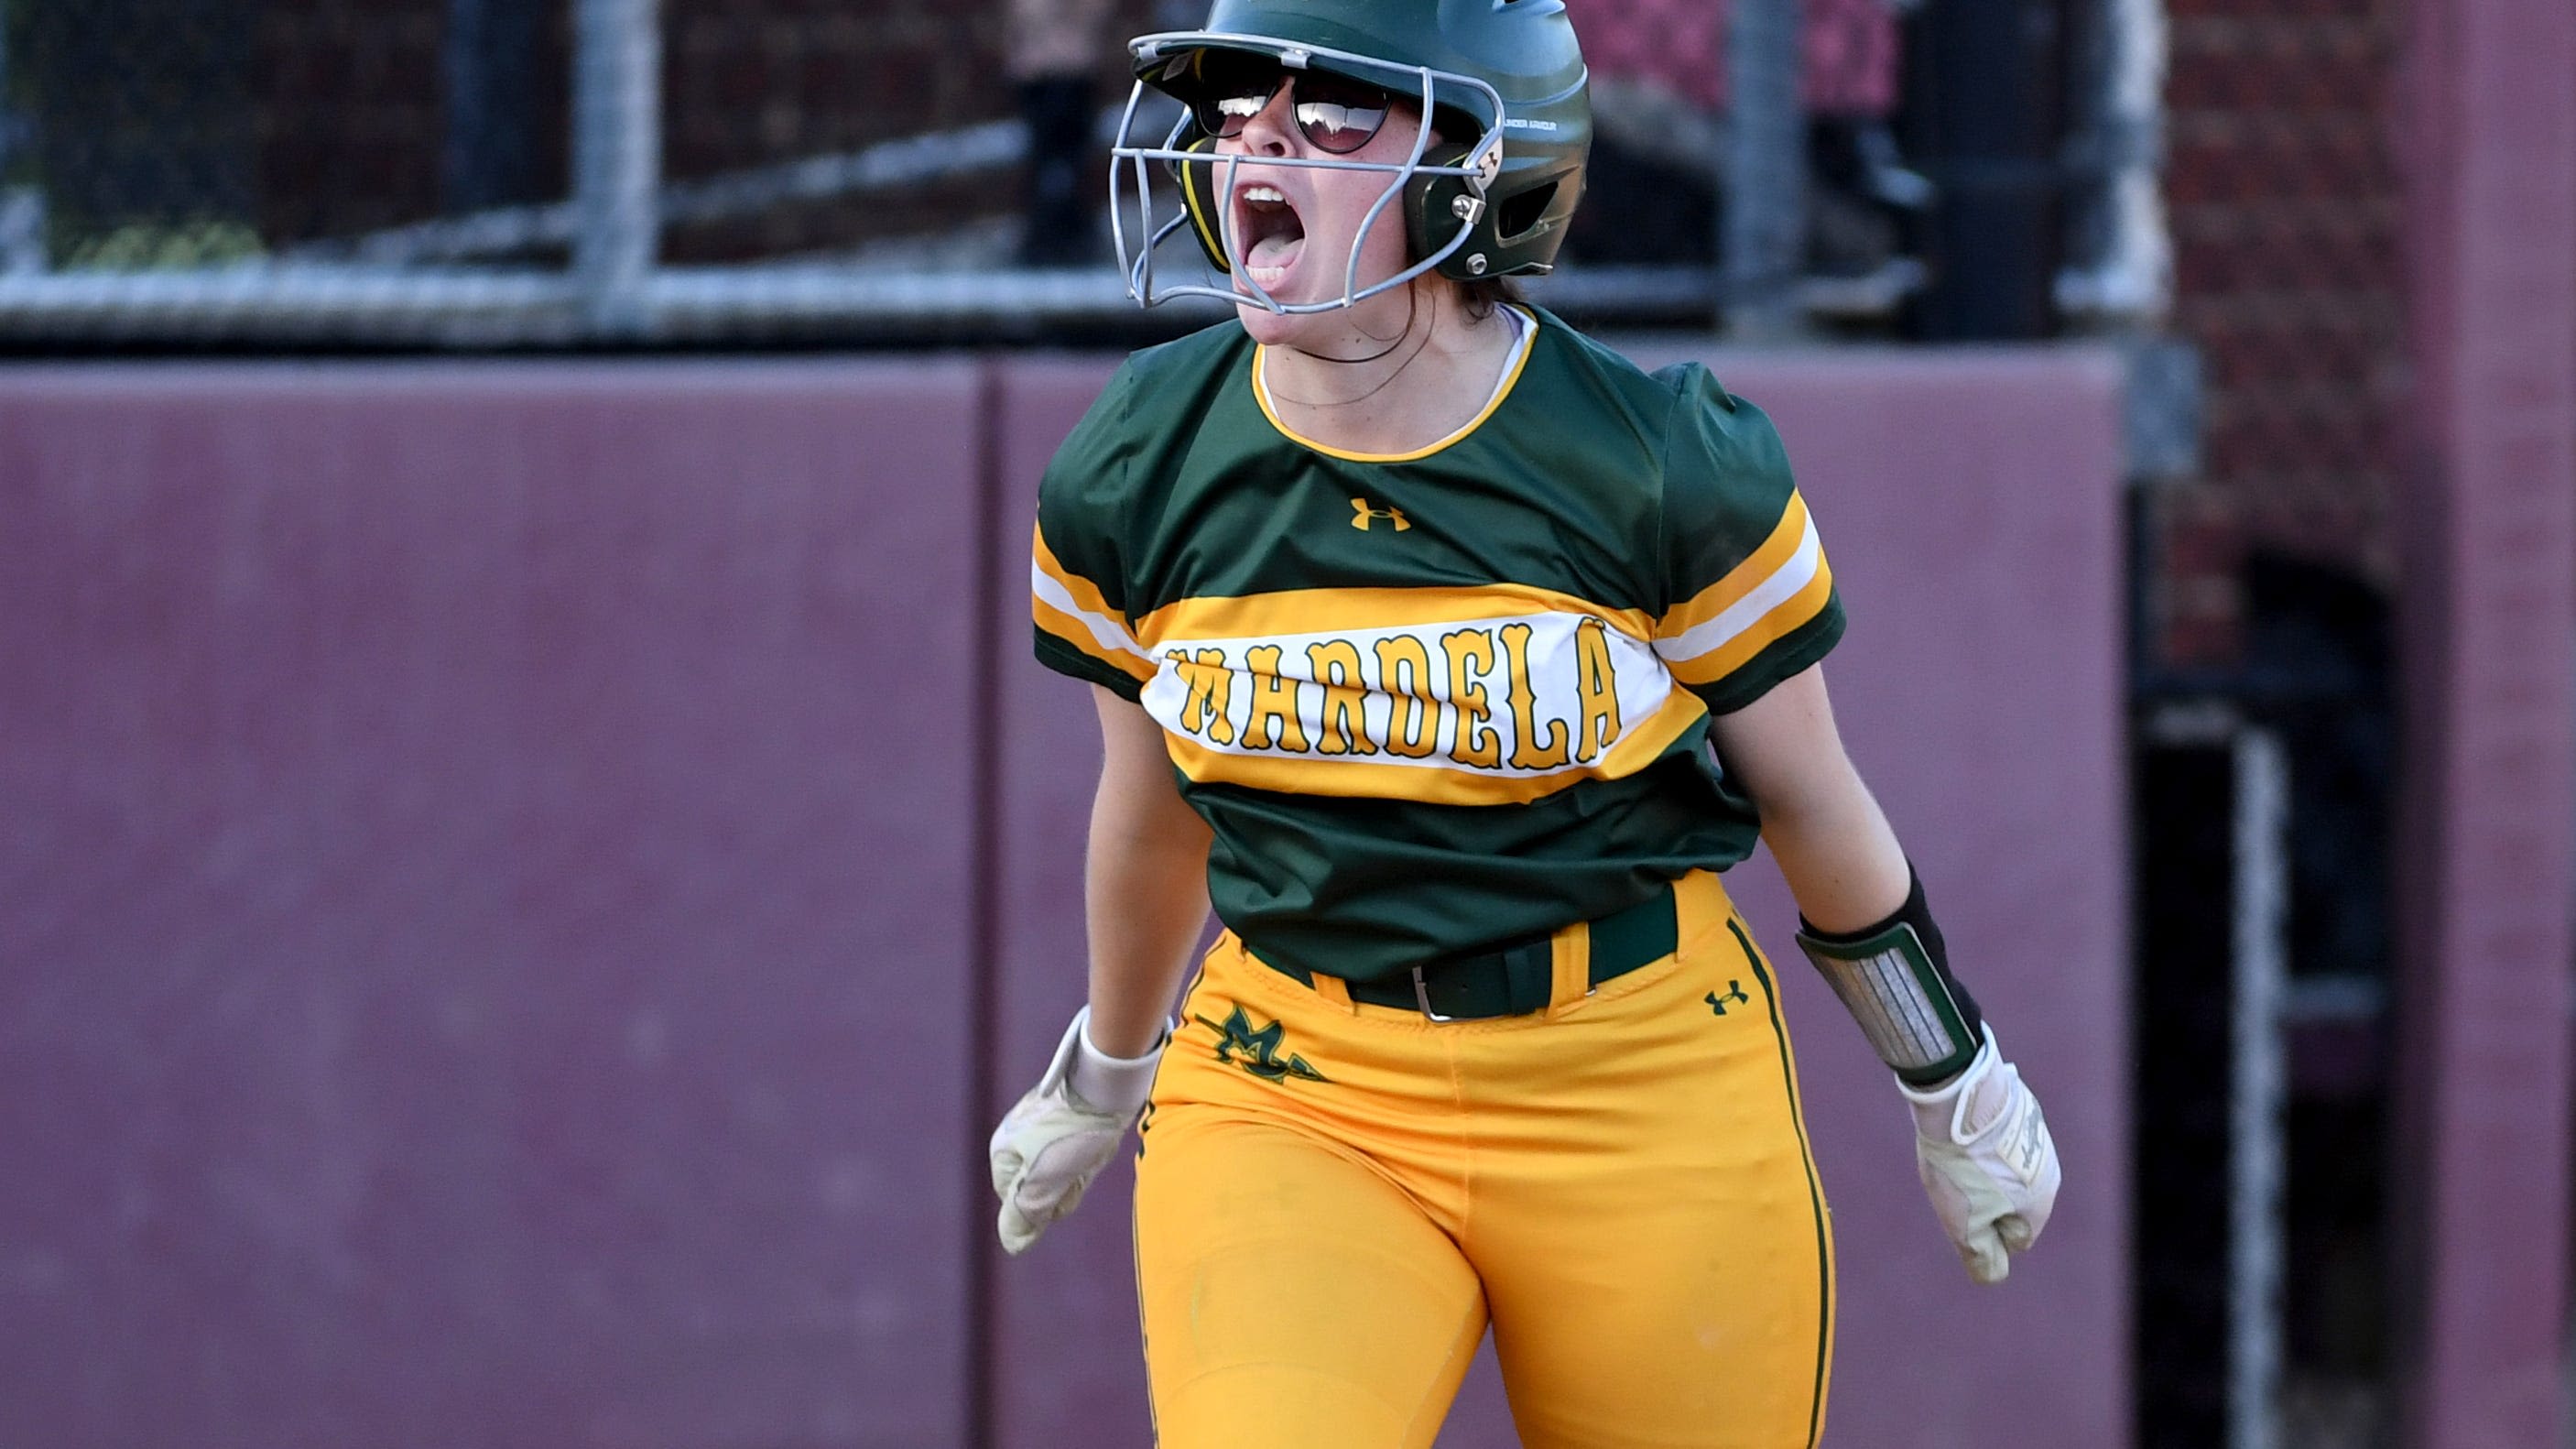 Mardela softball wins Bayside Championship vs. North Dorchester to stay undefeated: PHOTOS